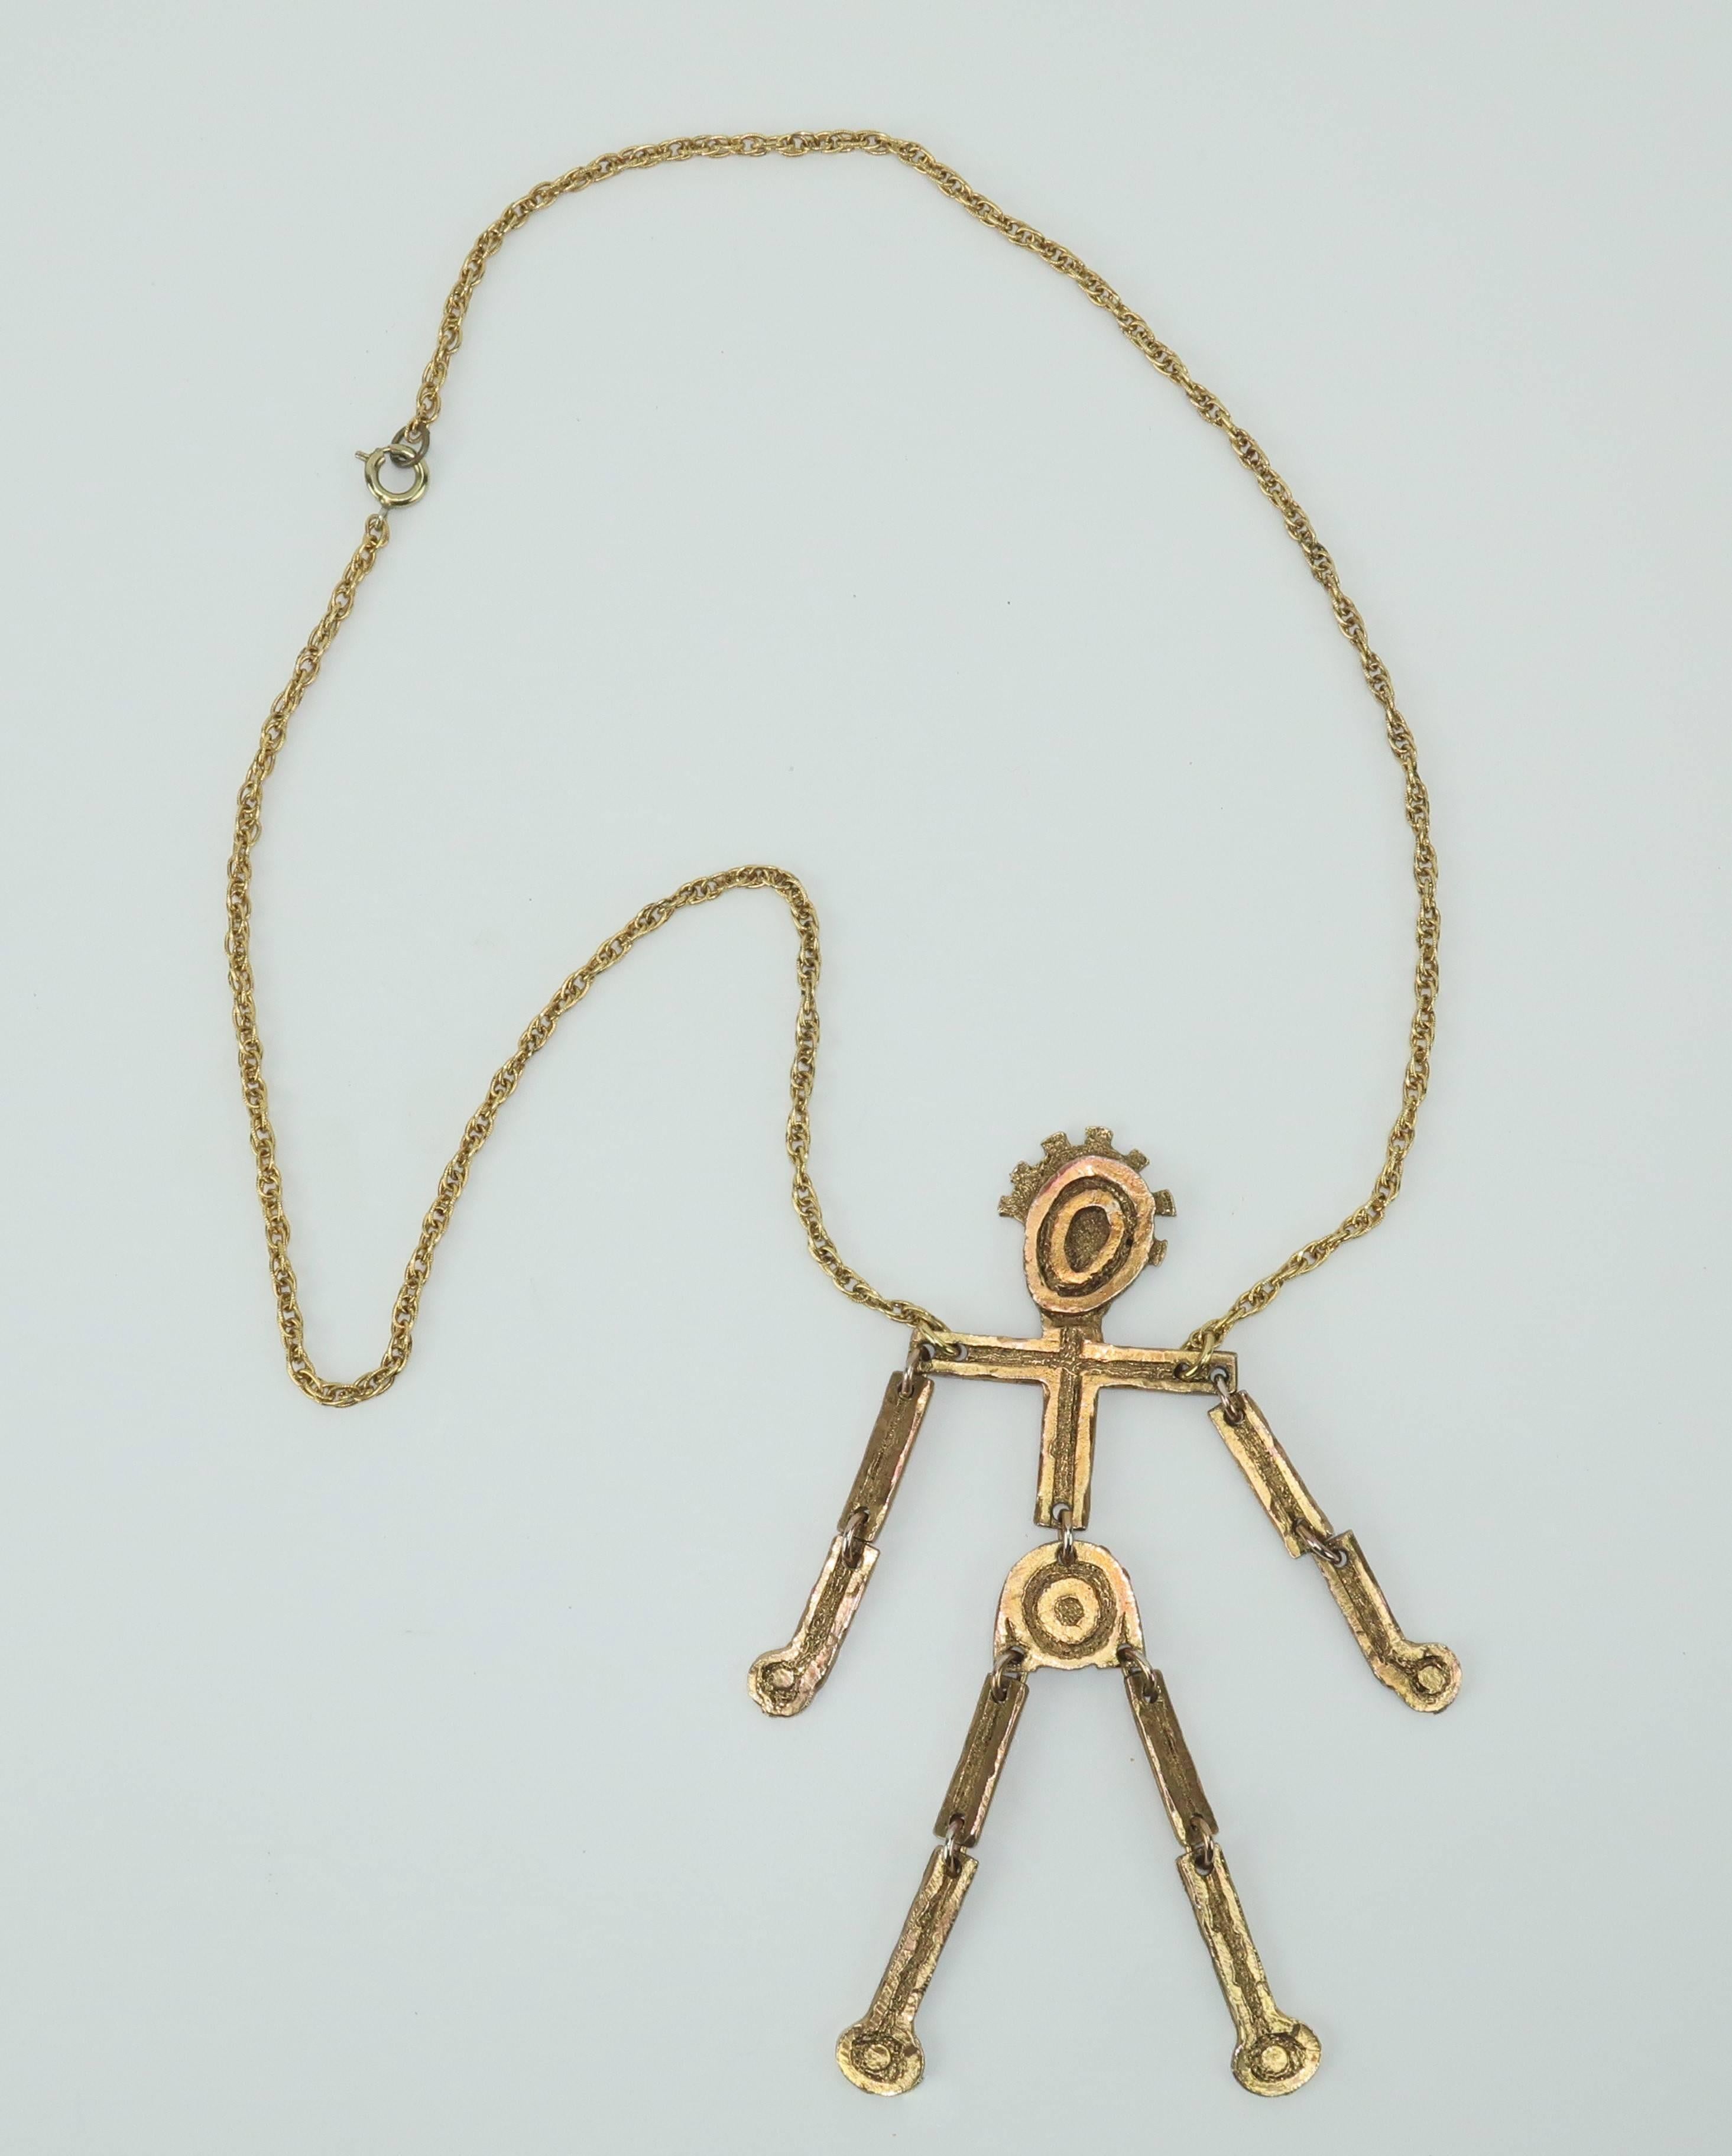 Mr. We is cuttin’ a rug with every move!  This C.1970 articulated man pendant necklace has a brutalist gold tone metal finish mixed with a whimsical style and loads of movement.  His hinged limbs enable him to shimmer and sway while attached to a